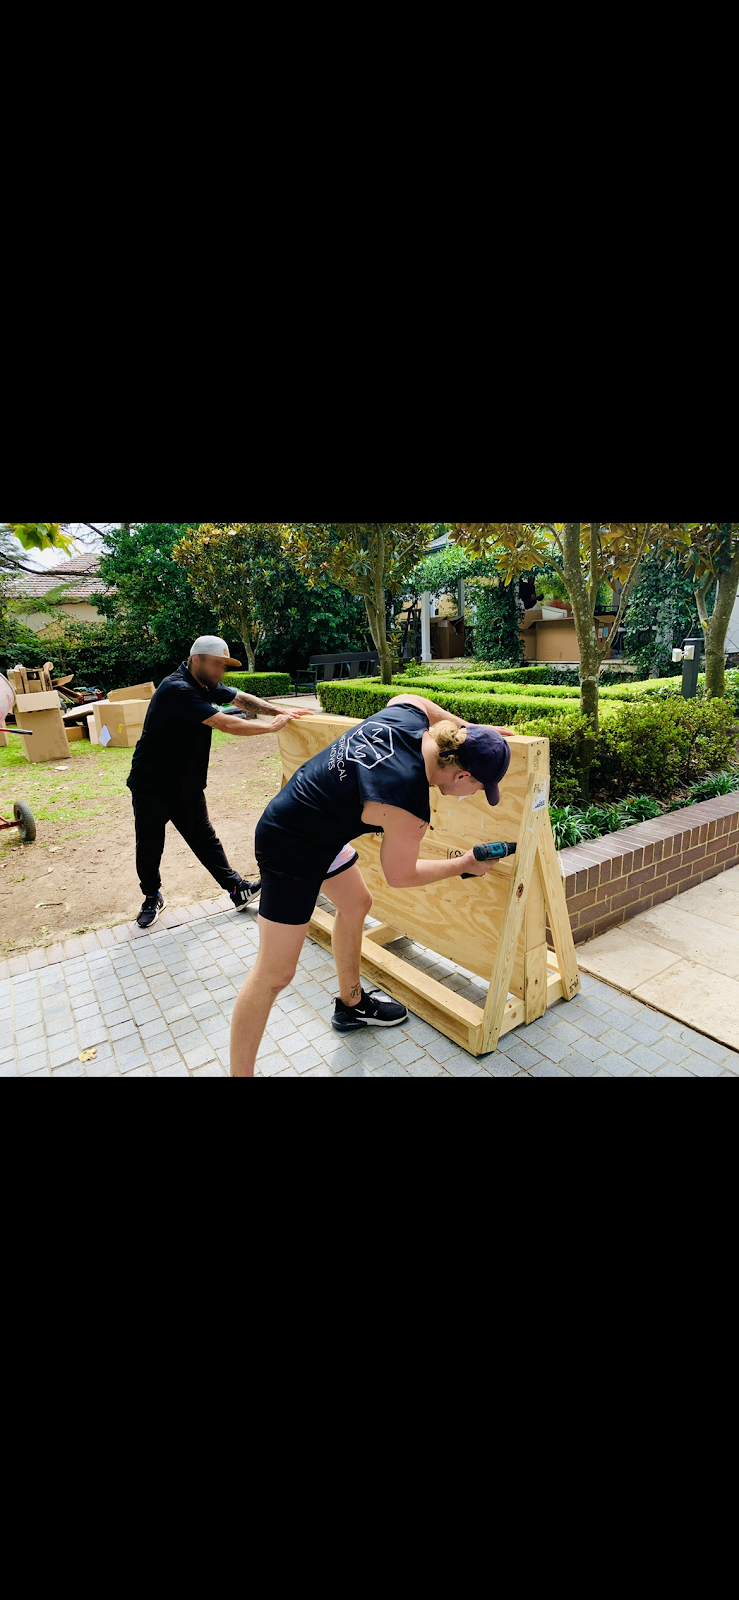 Methodical Moves - Byron Bay & Northern Rivers Removals | moving company | 7 Pacific Vista Dr, Byron Bay NSW 2481, Australia | 1300266838 OR +61 1300 266 838